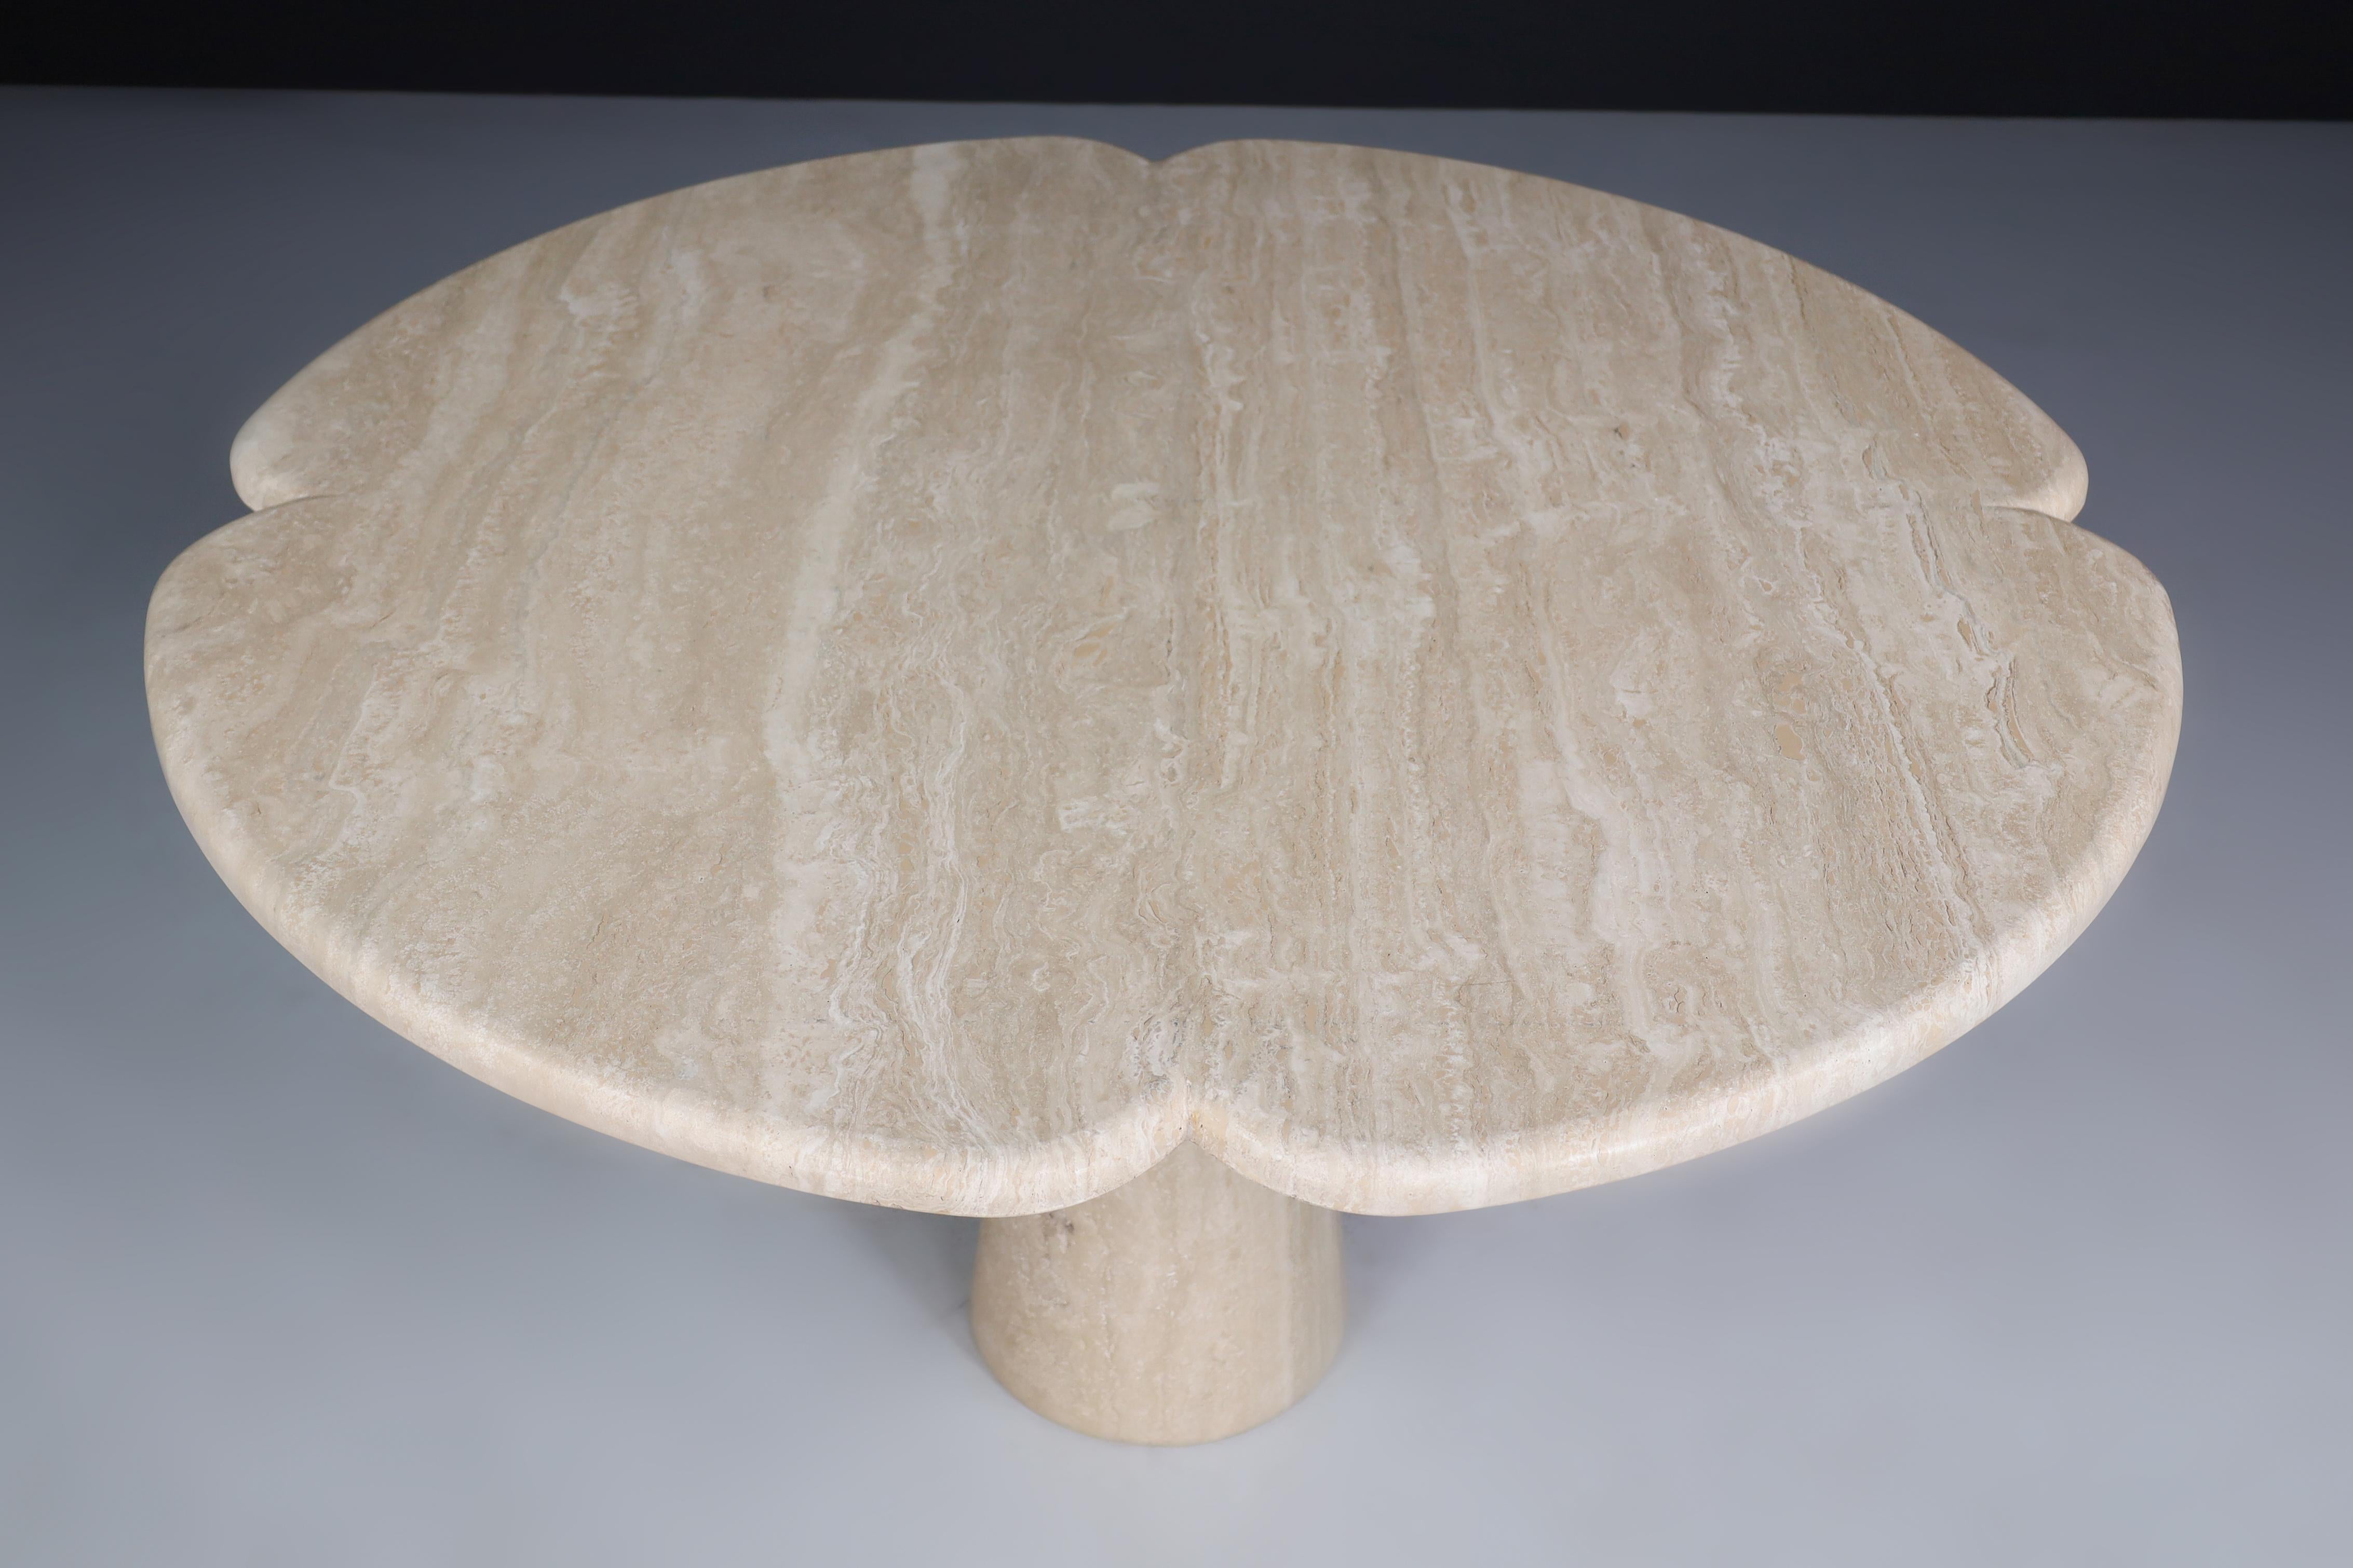 Flower-shaped top travertine dining table, Italy 1970s 

Beautiful flower-shaped top travertine dining table or centre table made in Italy in the 1970s. The thick heavy top sits on a solid travertine cone. Therefore, a lovely contrast is created